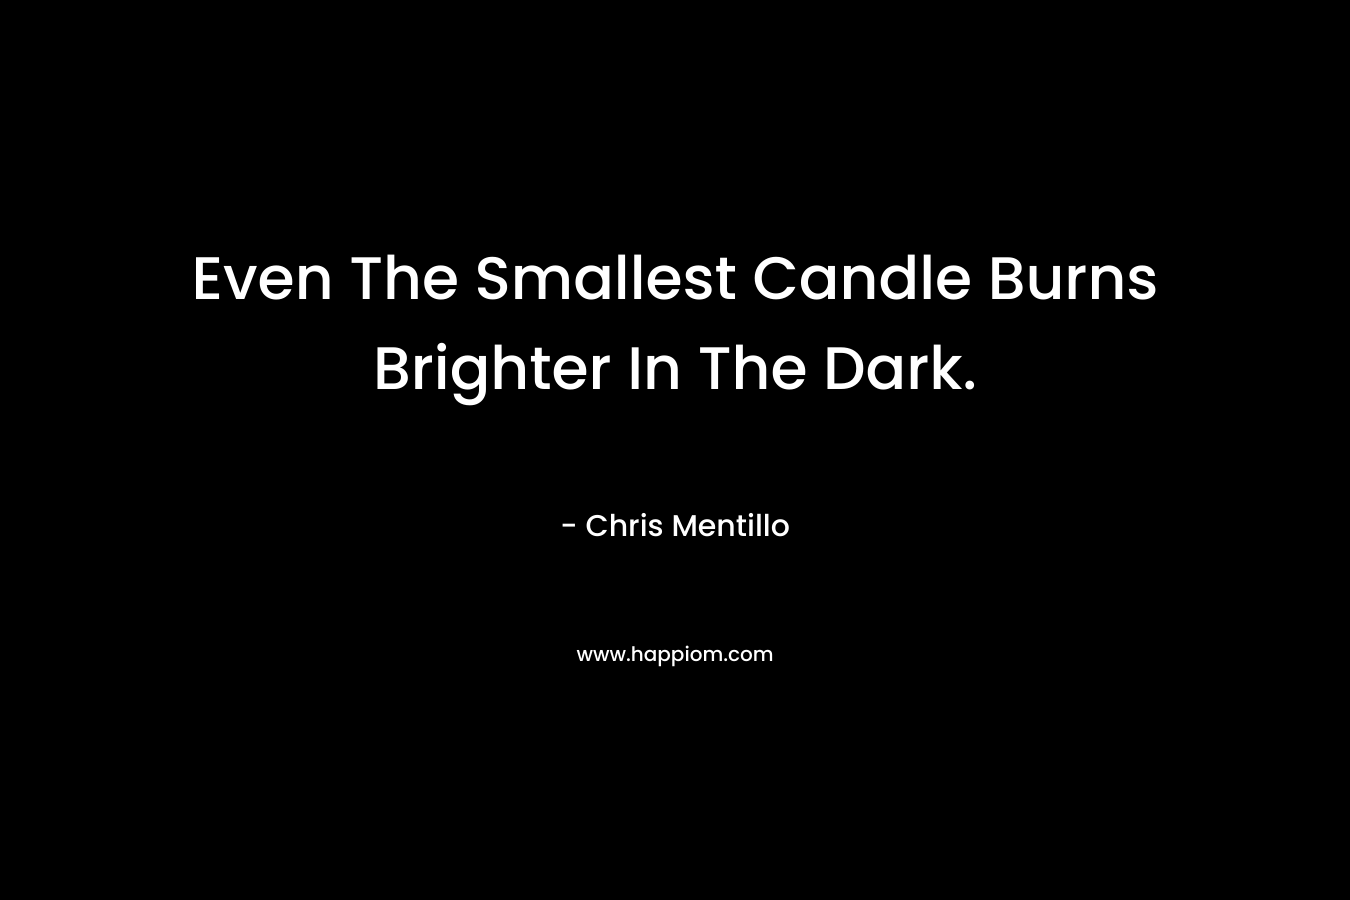 Even The Smallest Candle Burns Brighter In The Dark.